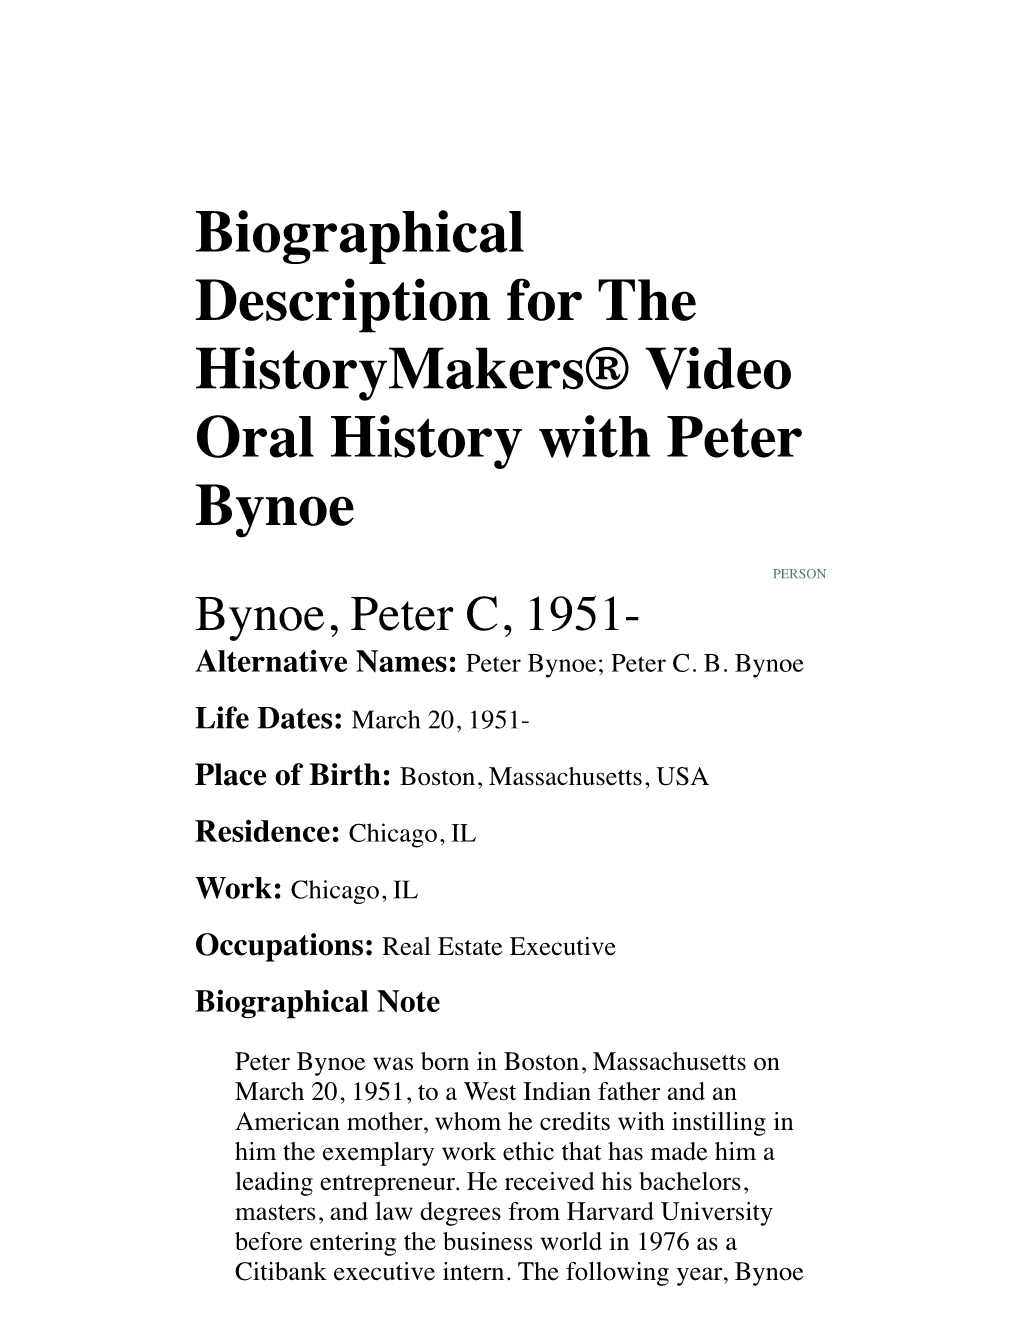 Biographical Description for the Historymakers® Video Oral History with Peter Bynoe